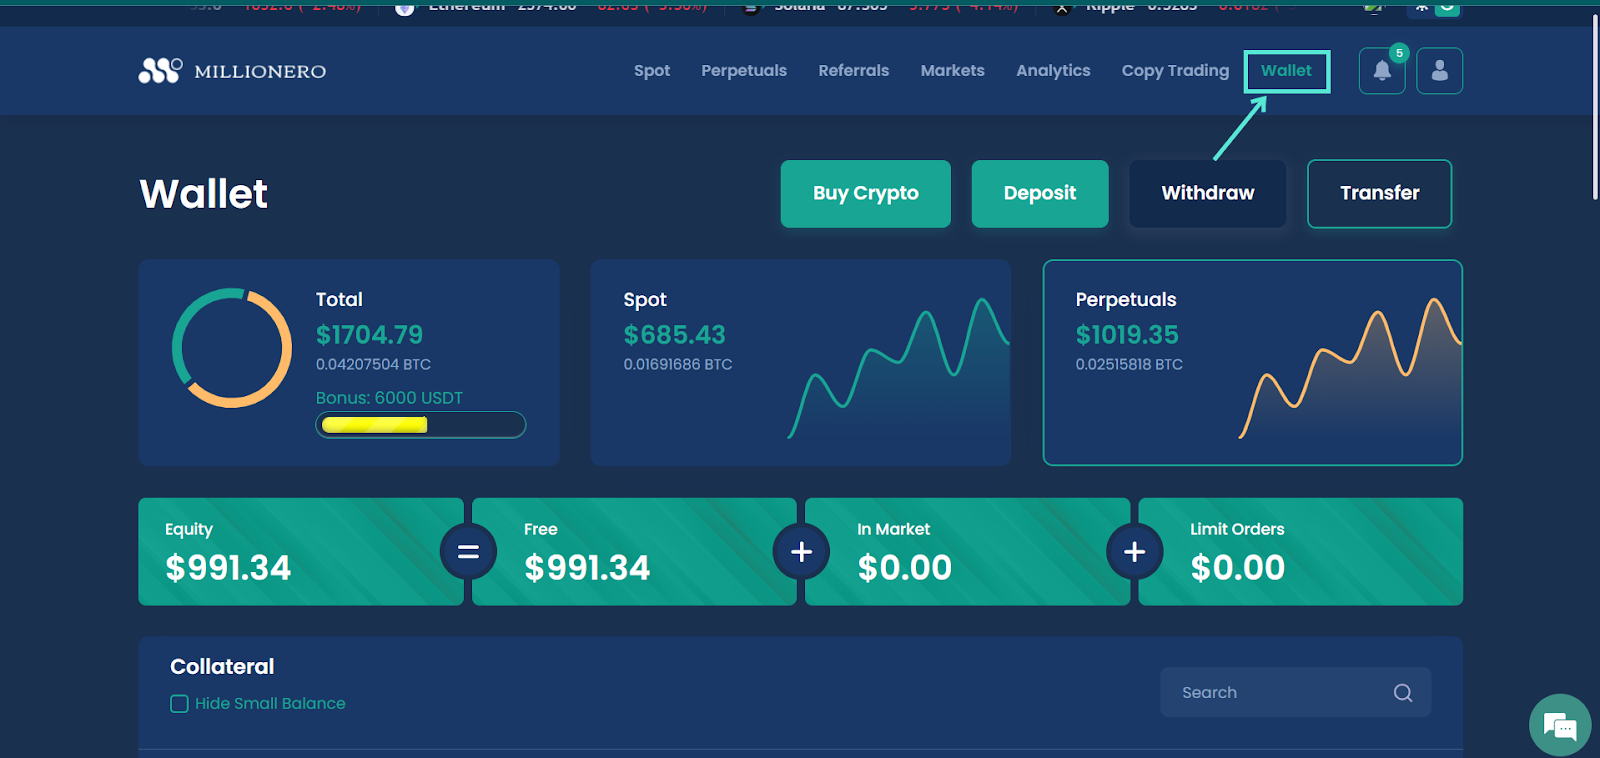 crypto trading on Millionero: Choose the wallet section 